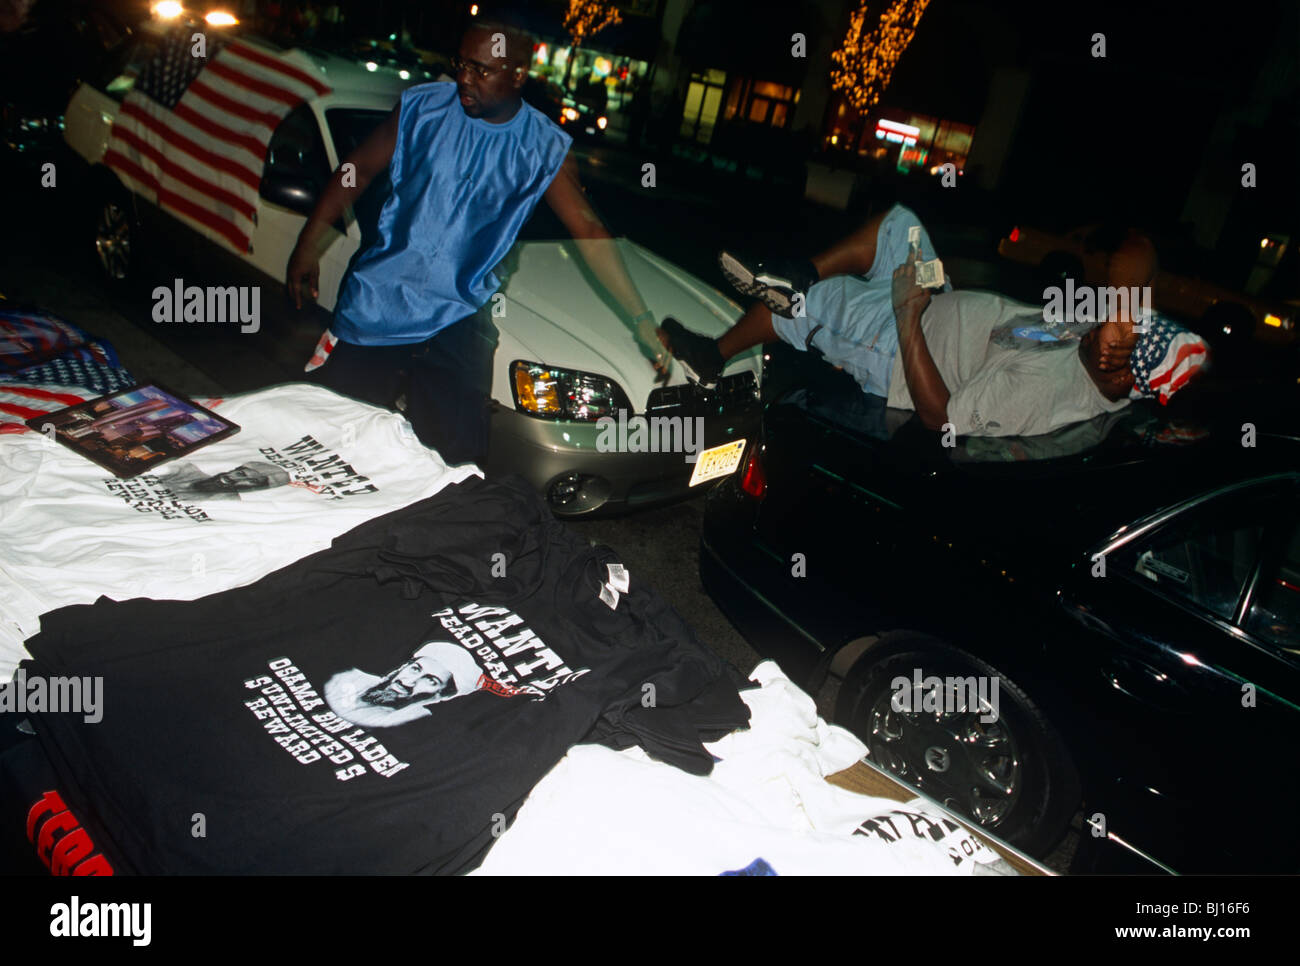 Osama bin Laden t-shirts are on sale at night in the streets of Manhattan, only days after the attacks on New York's twin towers Stock Photo